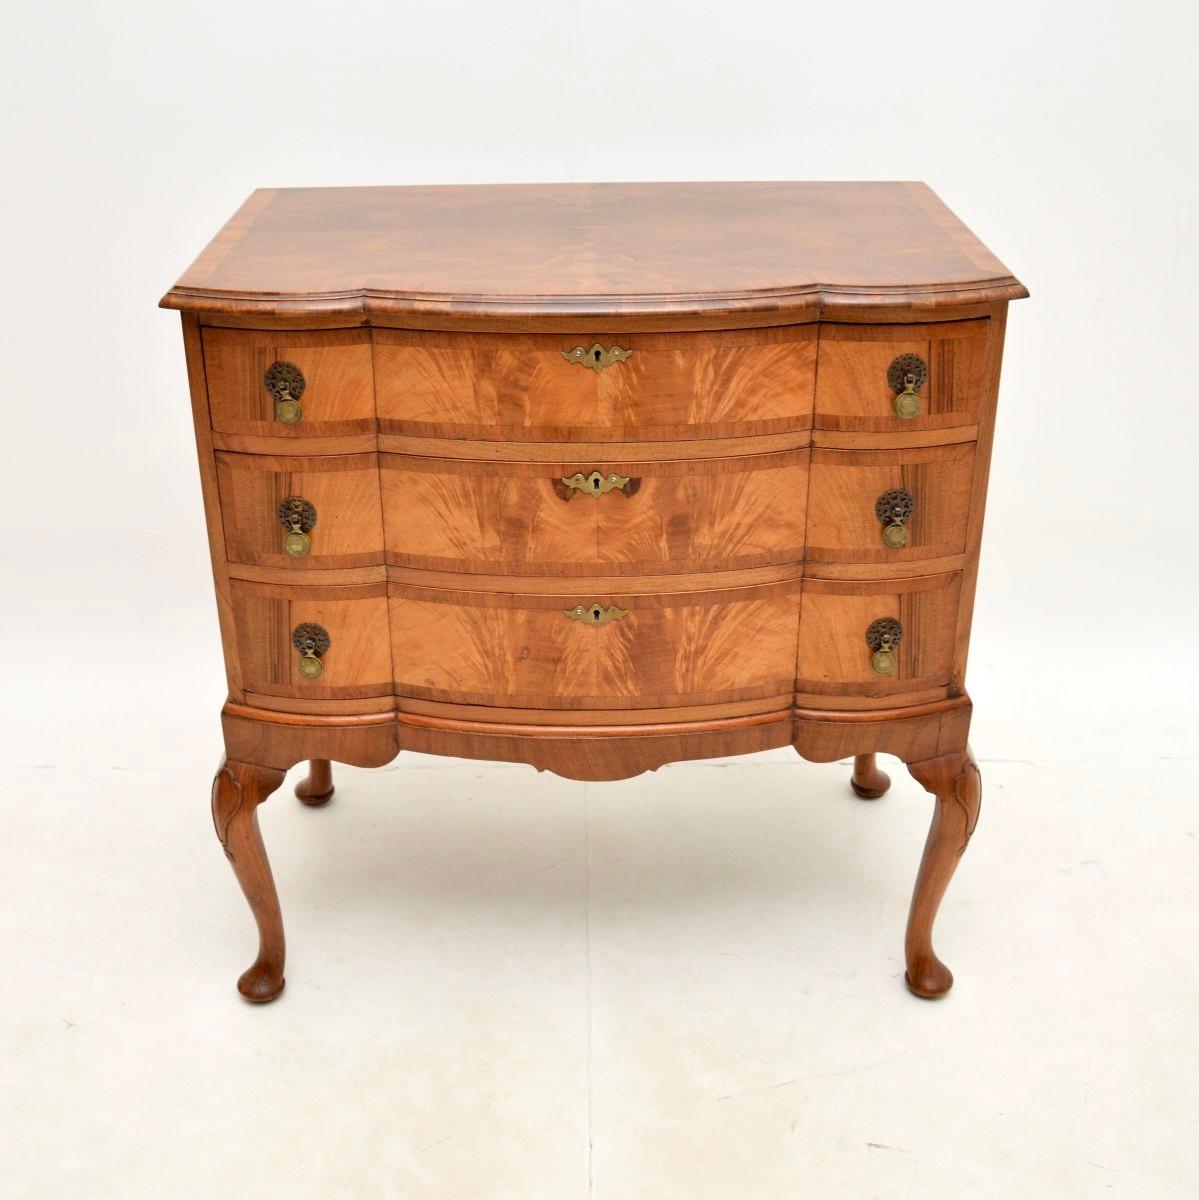 A stunning antique figured walnut chest of drawers. This was made in England, it dates from around the 1900-1910 period.

It is of superb quality and is a useful size, with lots of storage space. There are gorgeous figured walnut grain patterns,